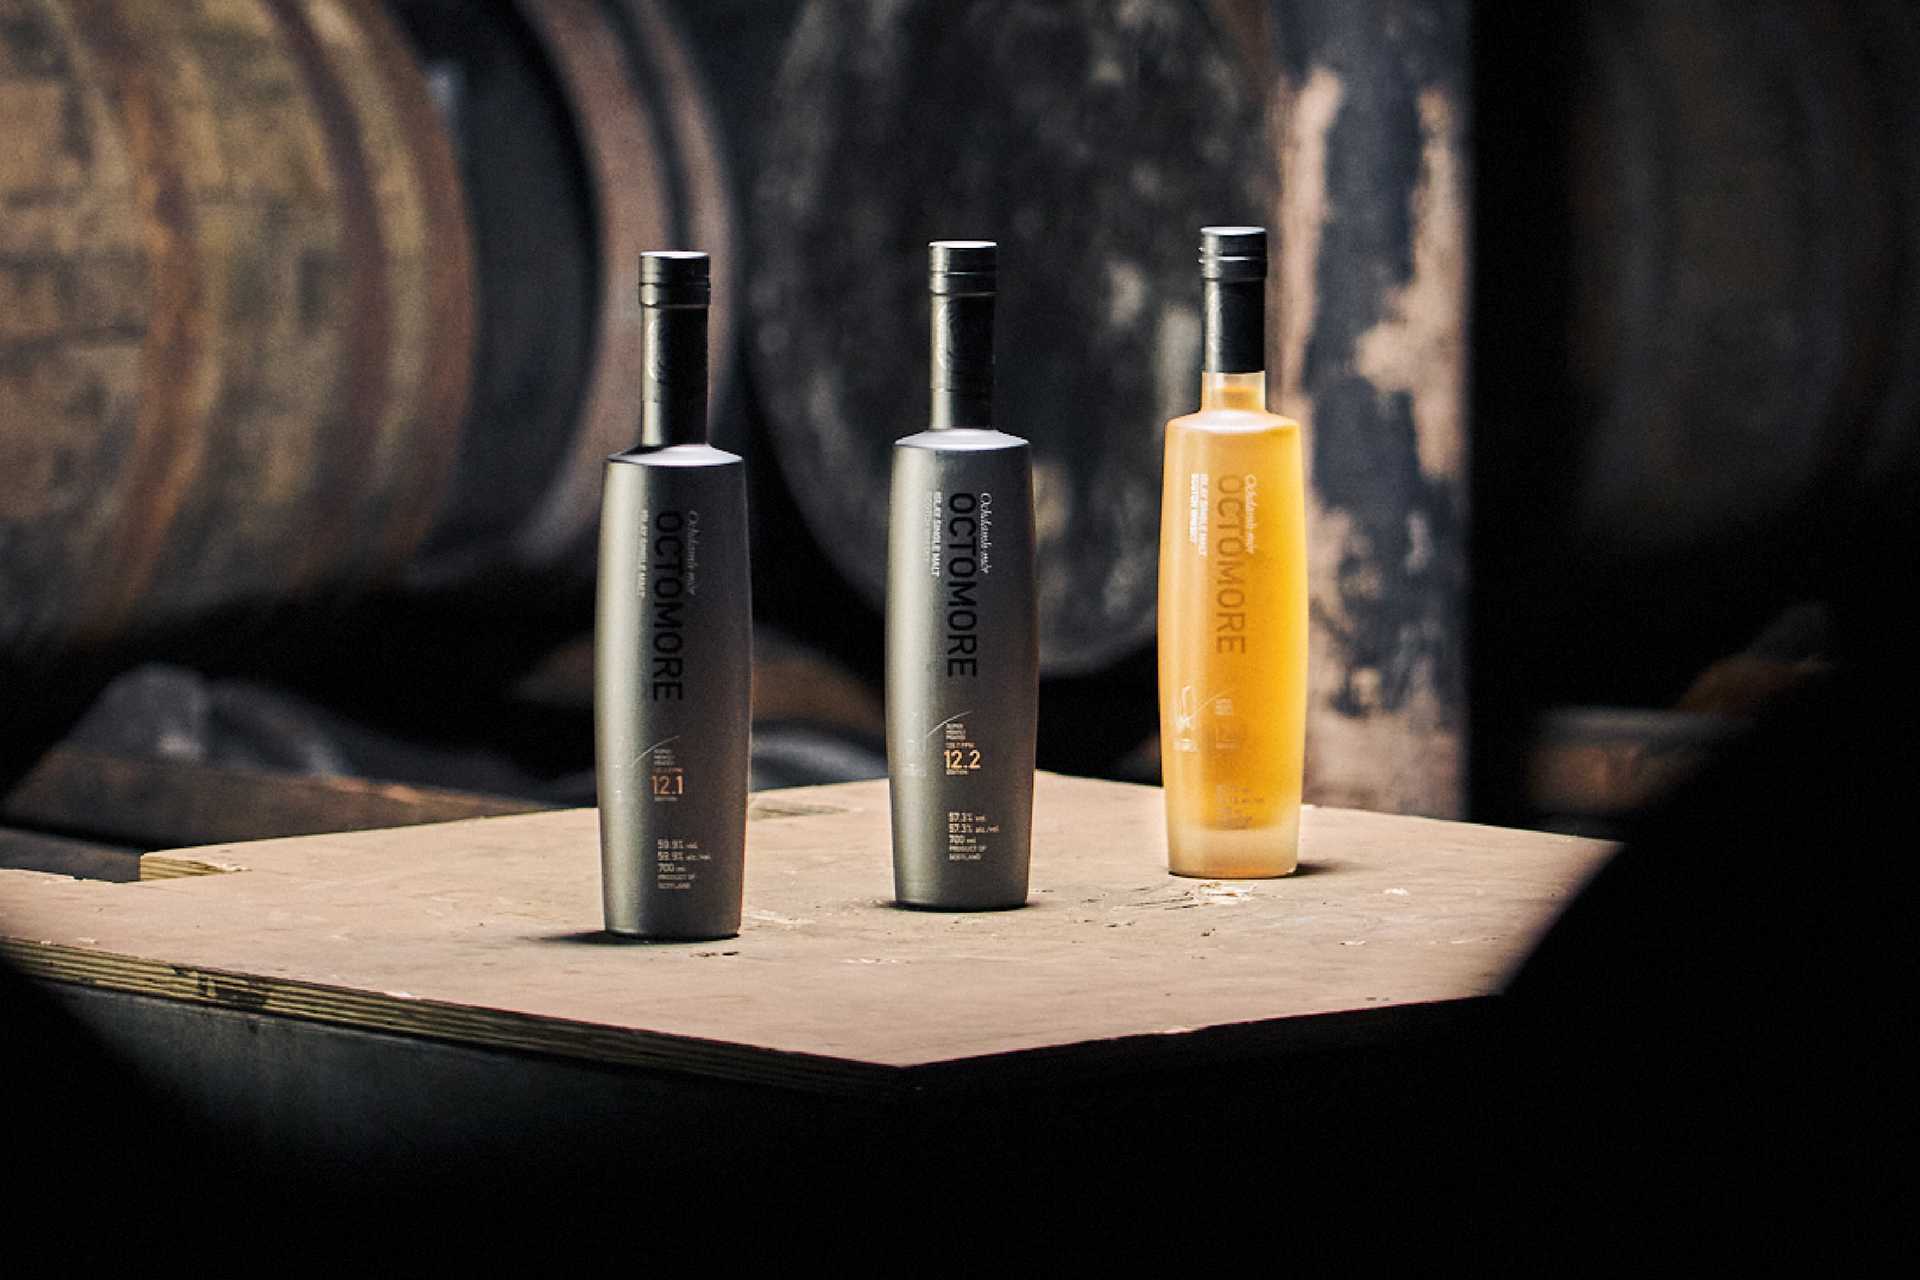 OCTOMORE 12 Series, from £125